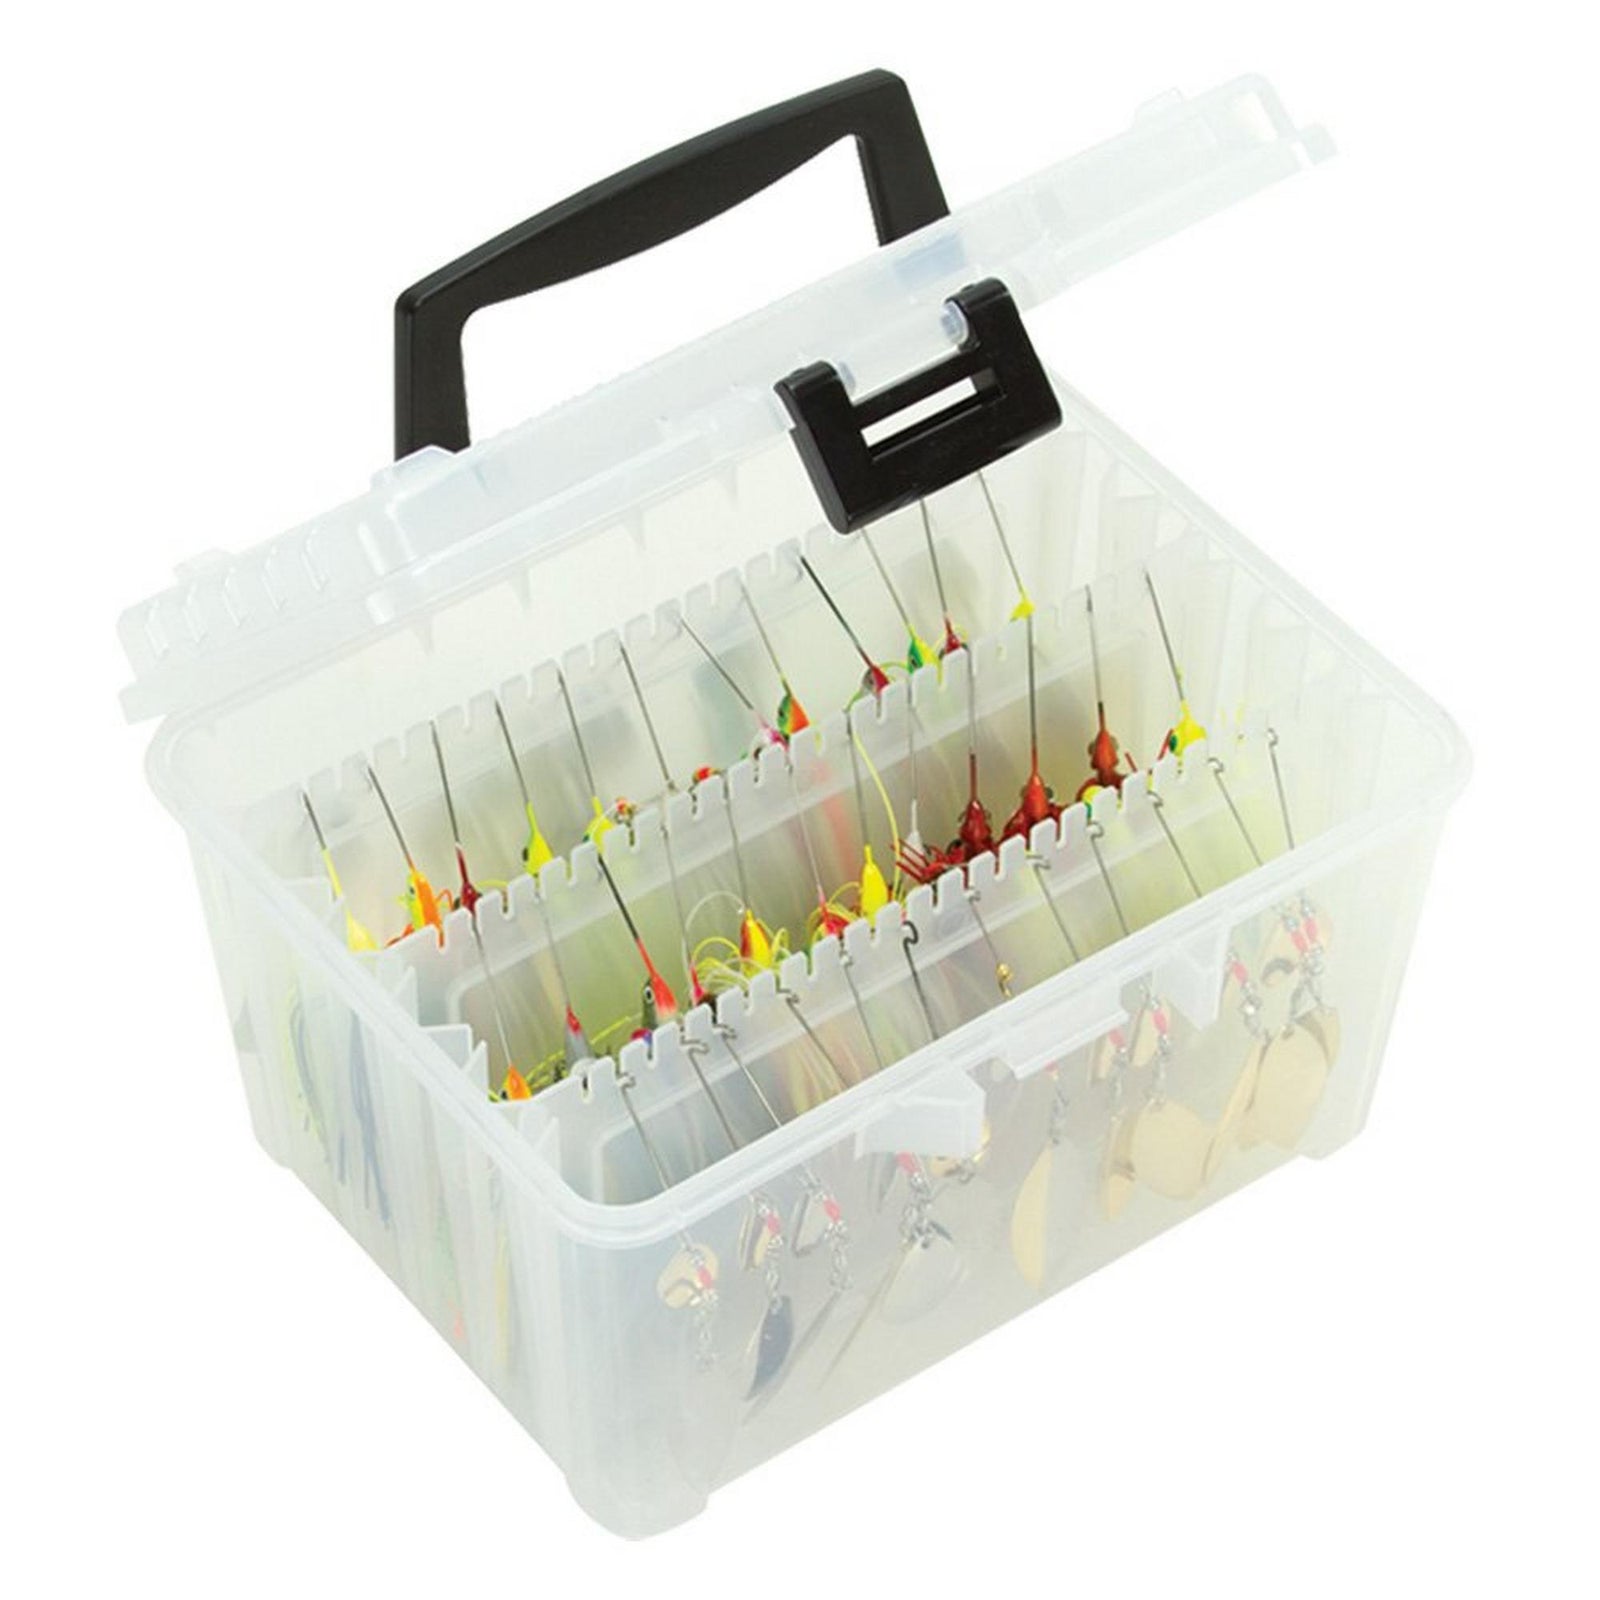 Plano Boxes and Tackle Bags - The Saltwater Edge